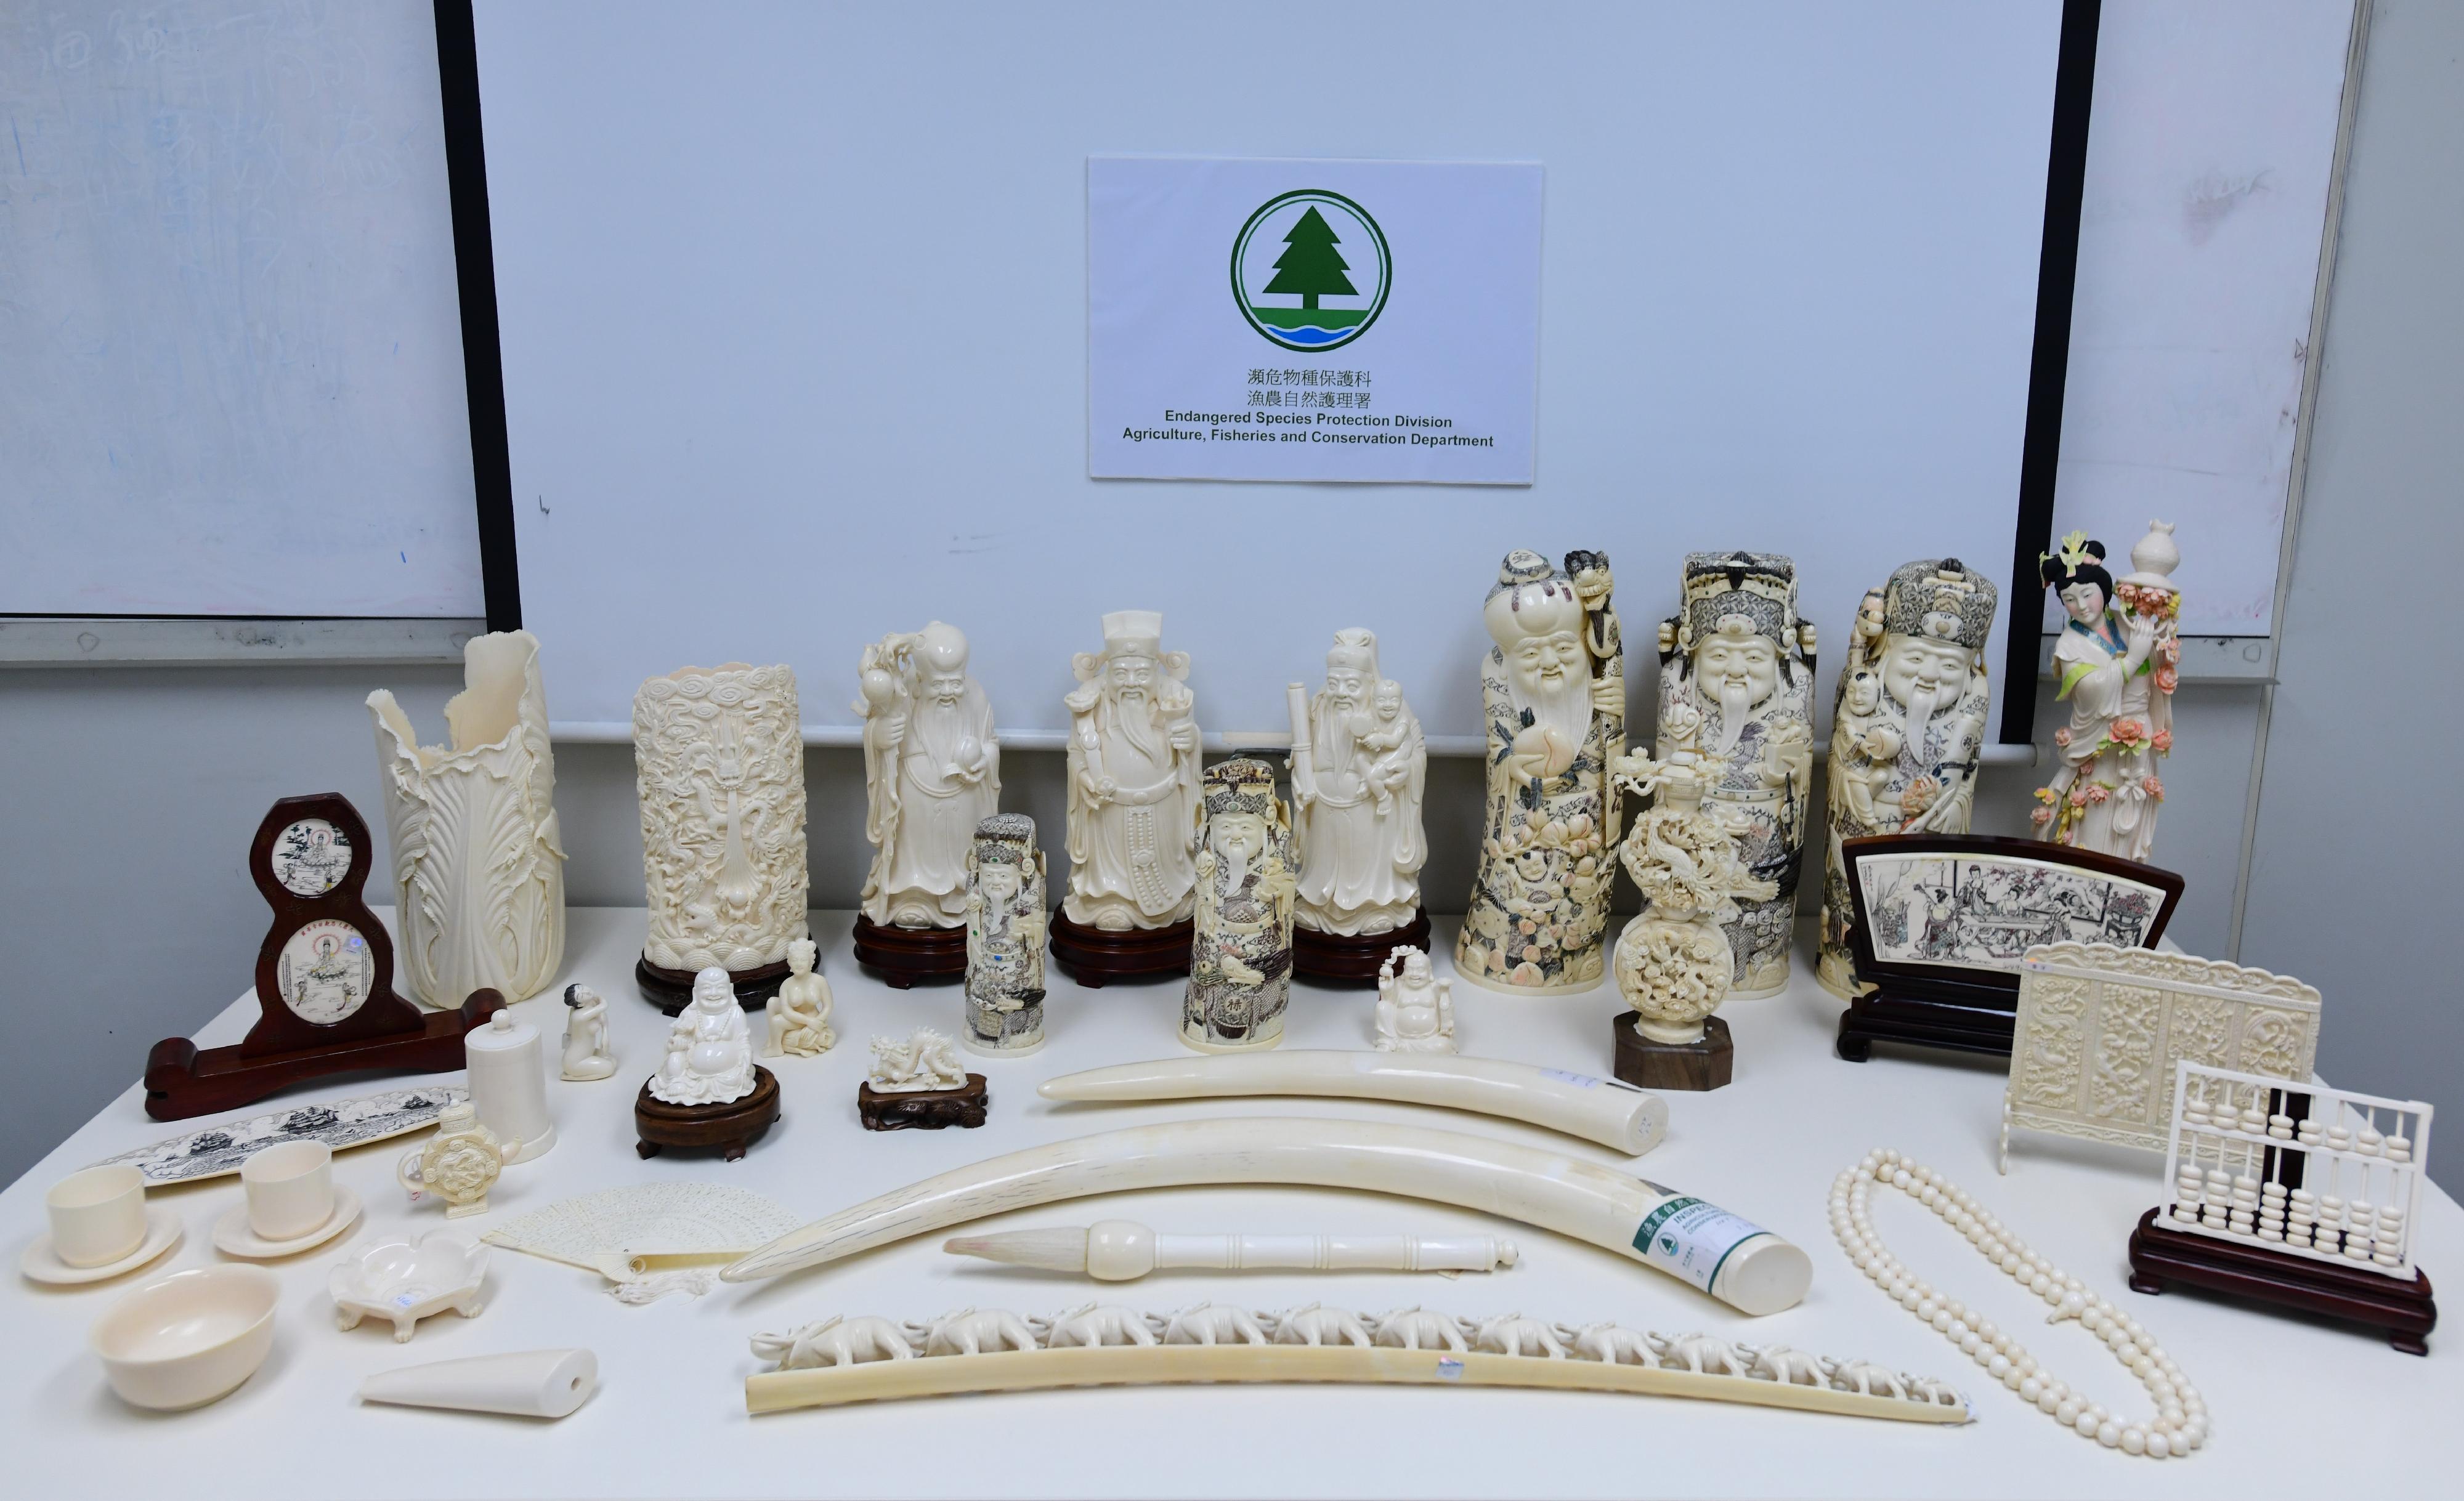 The Agriculture, Fisheries and Conservation Department yesterday (July 27) seized a total of 284 pieces of suspected elephant ivory products from a shop in Yau Tsim Mong District. Photo shows some of the suspected elephant ivory products seized.